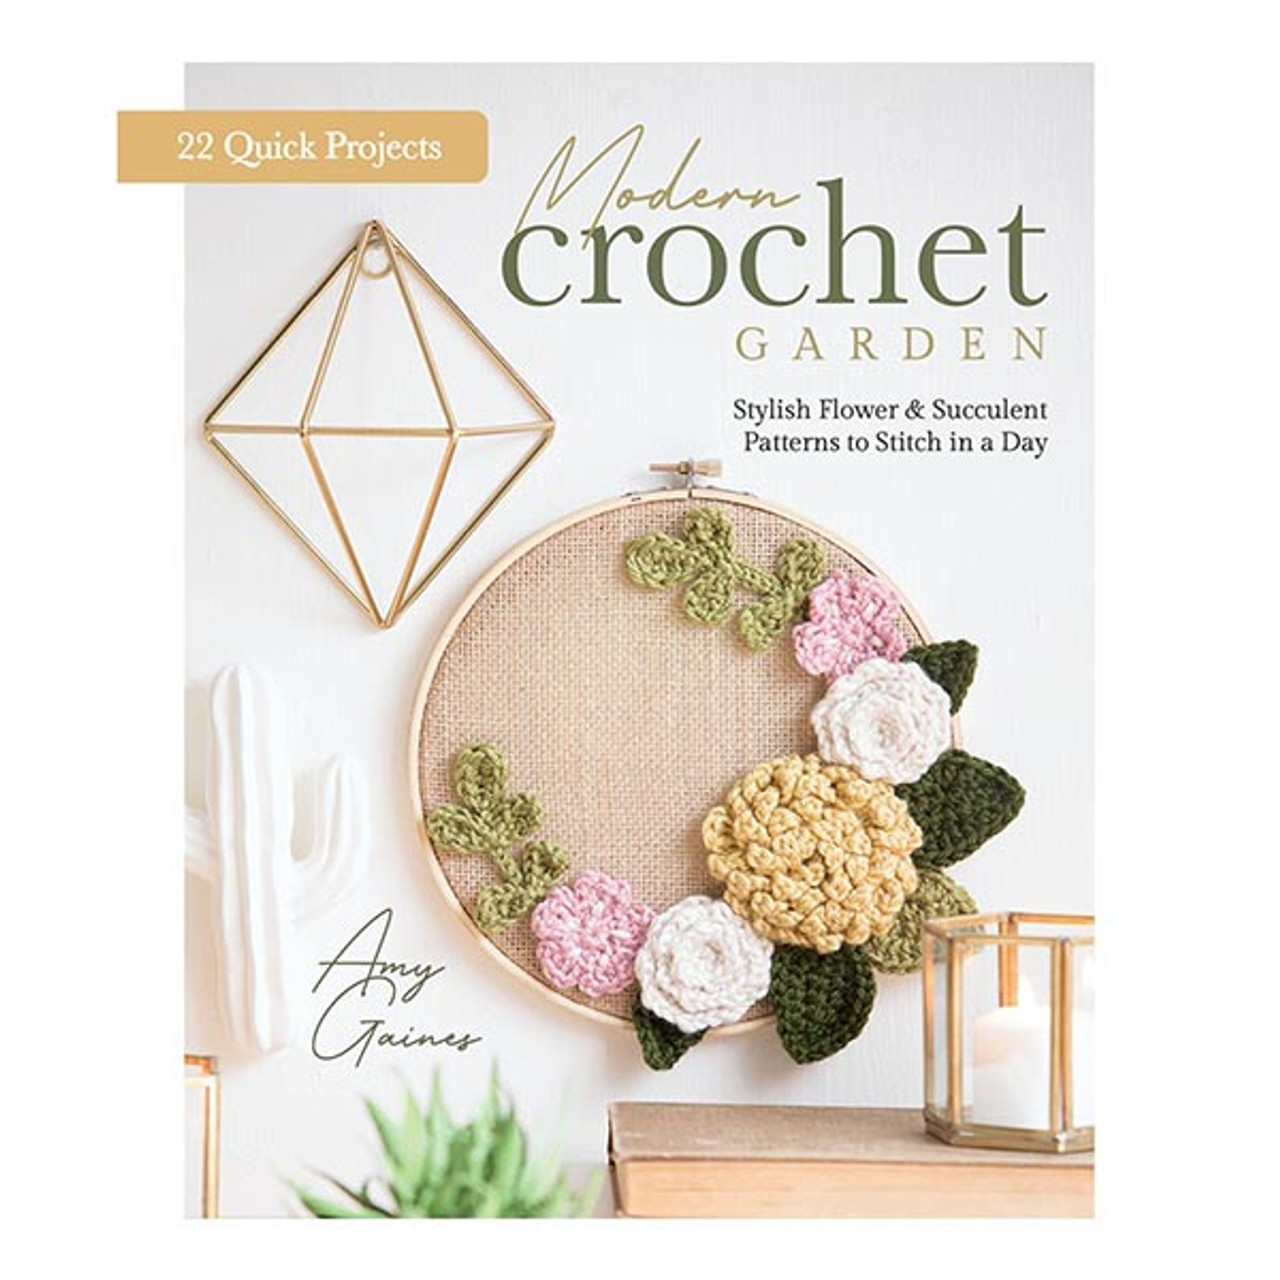 Crochet for Beginners 2 Books in 1: The Most Complete Step-by-step Guide to Learn Crocheting Quickly and Easily with Pictures and Illustrations, Including Amigurumi and Amazing Pattern Ideas [Book]